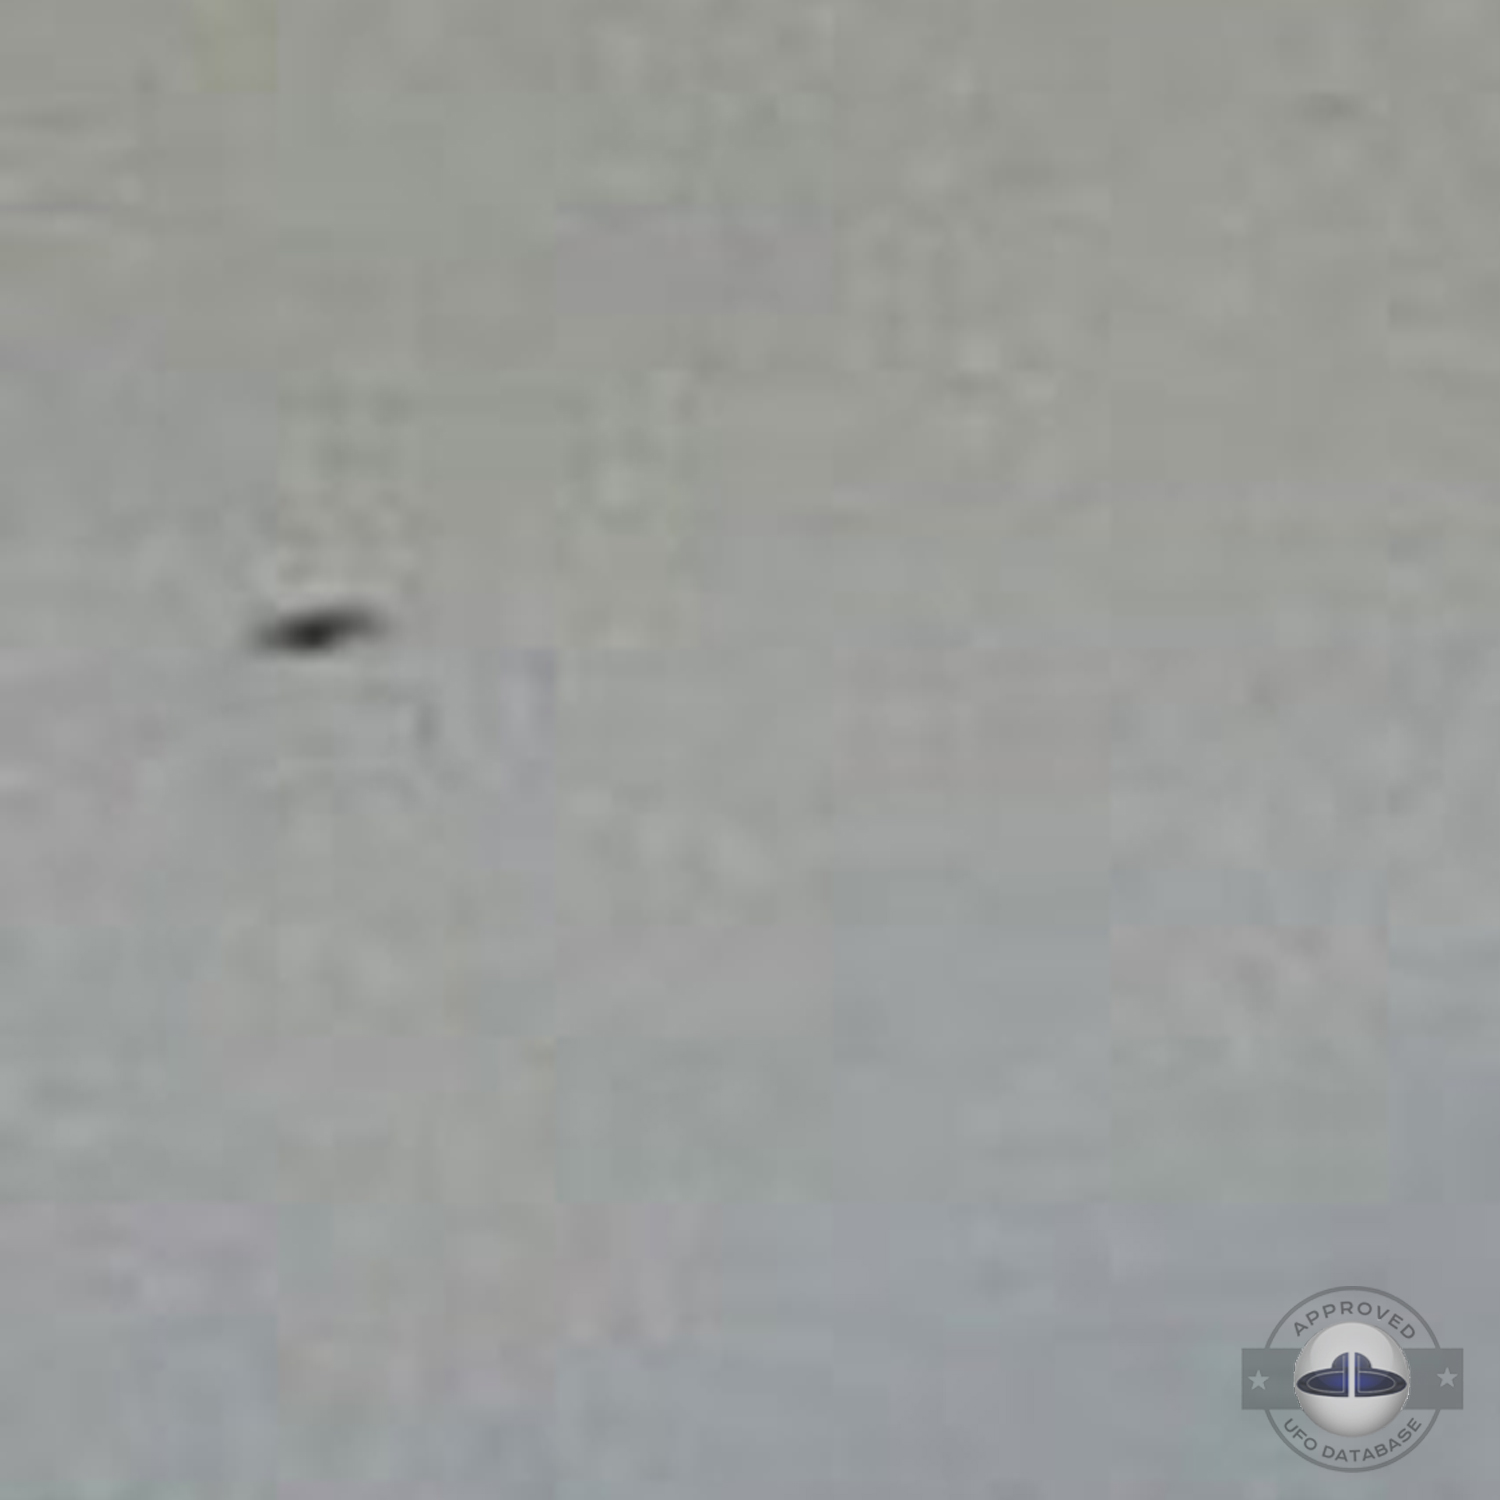 UFO picture taken in 2005 showing ufo close to coming airplane UFO Picture #24-4